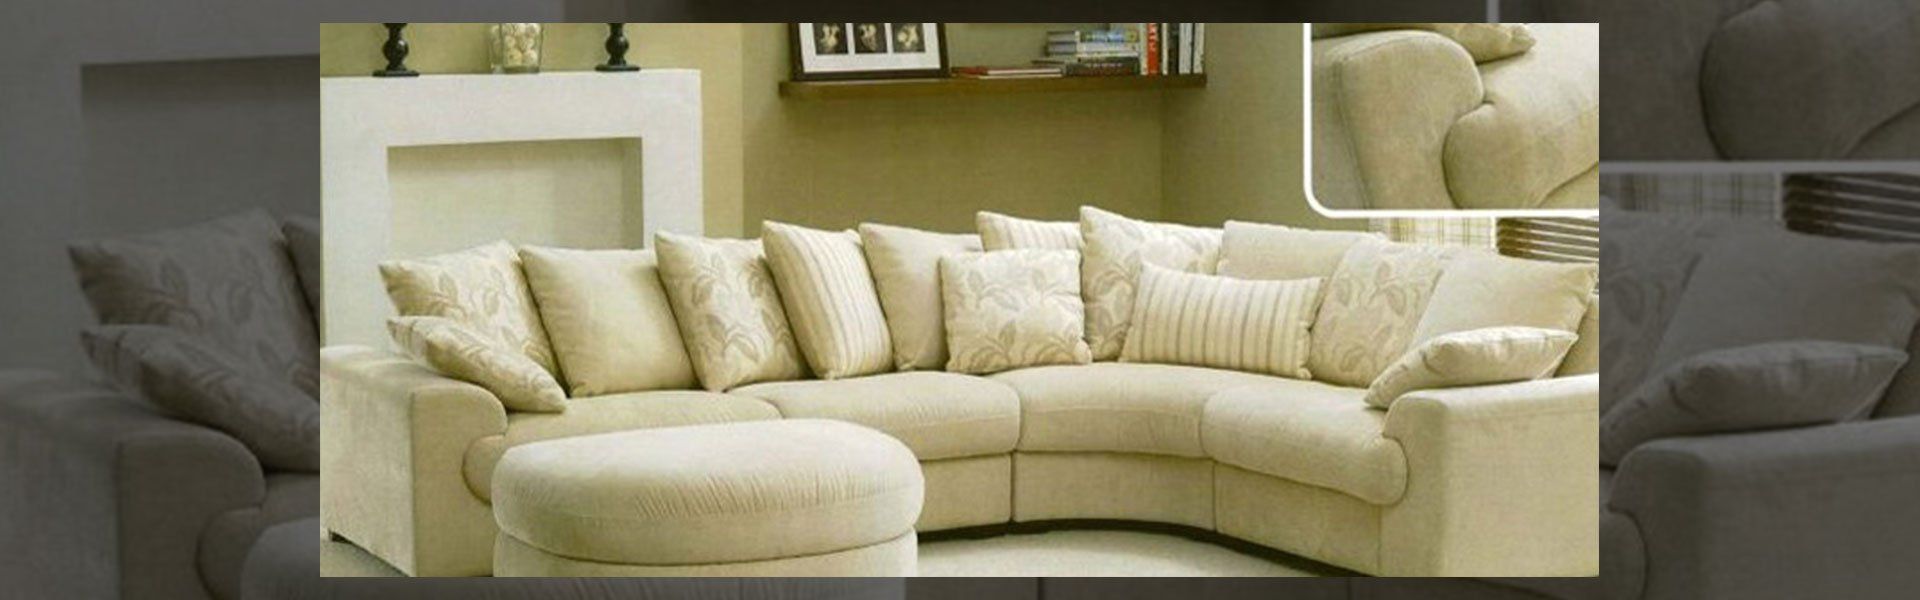 We offer exceptional re-upholstery